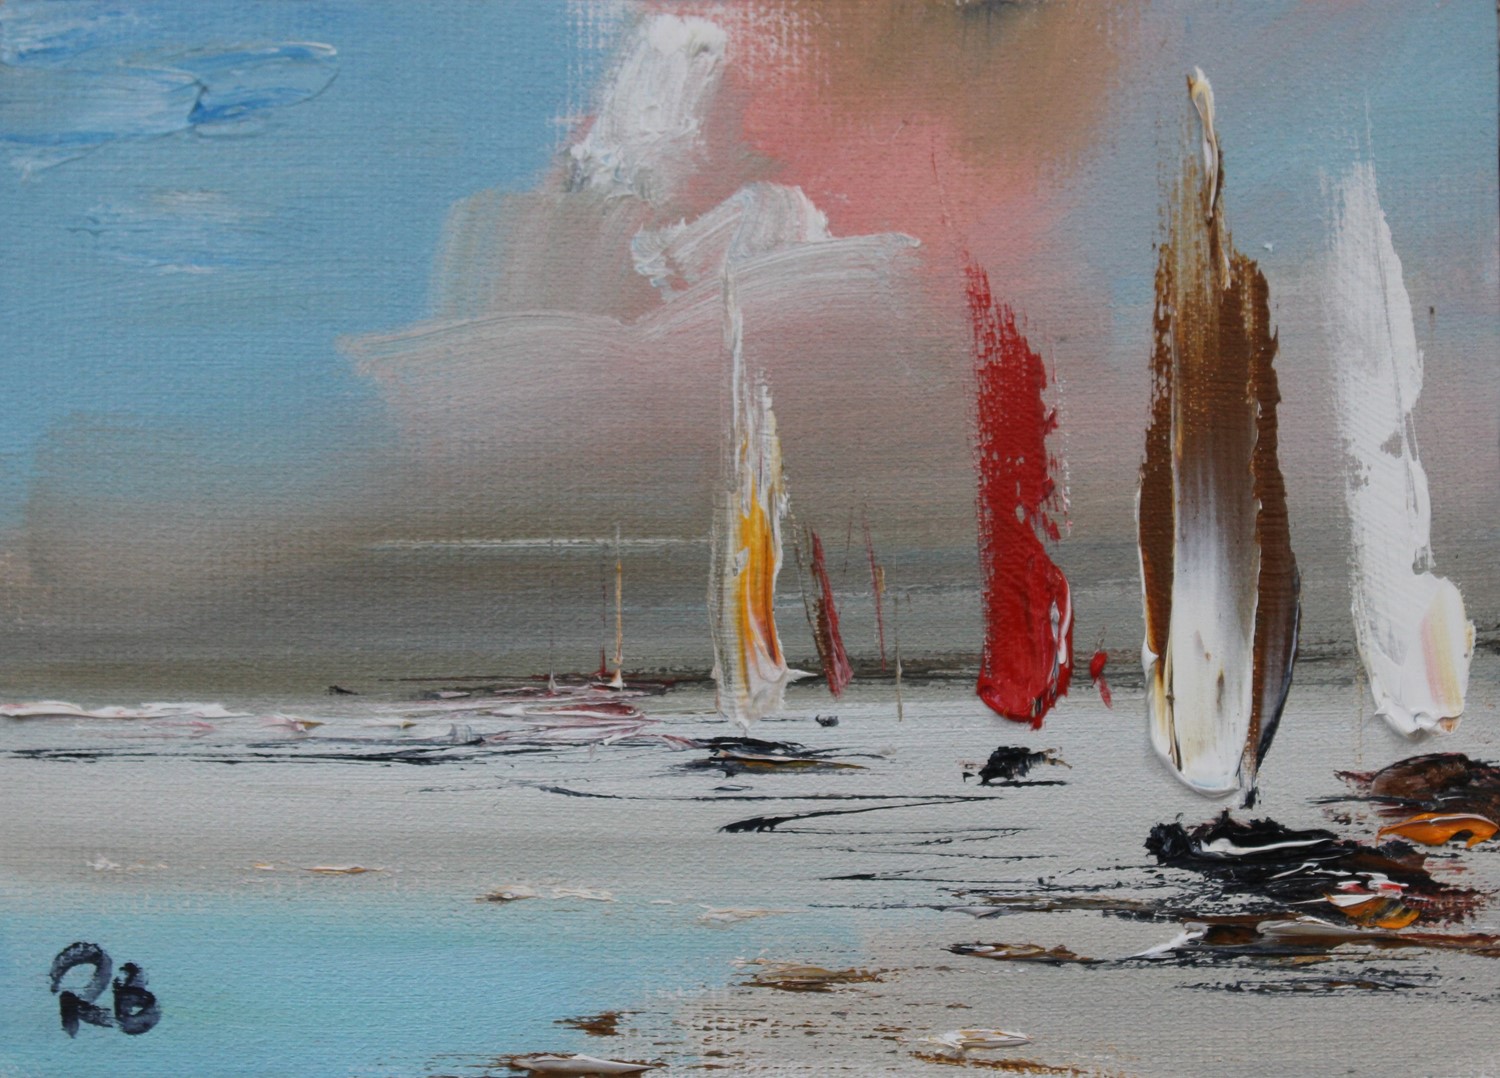 'Scattering of Sails' by artist Rosanne Barr